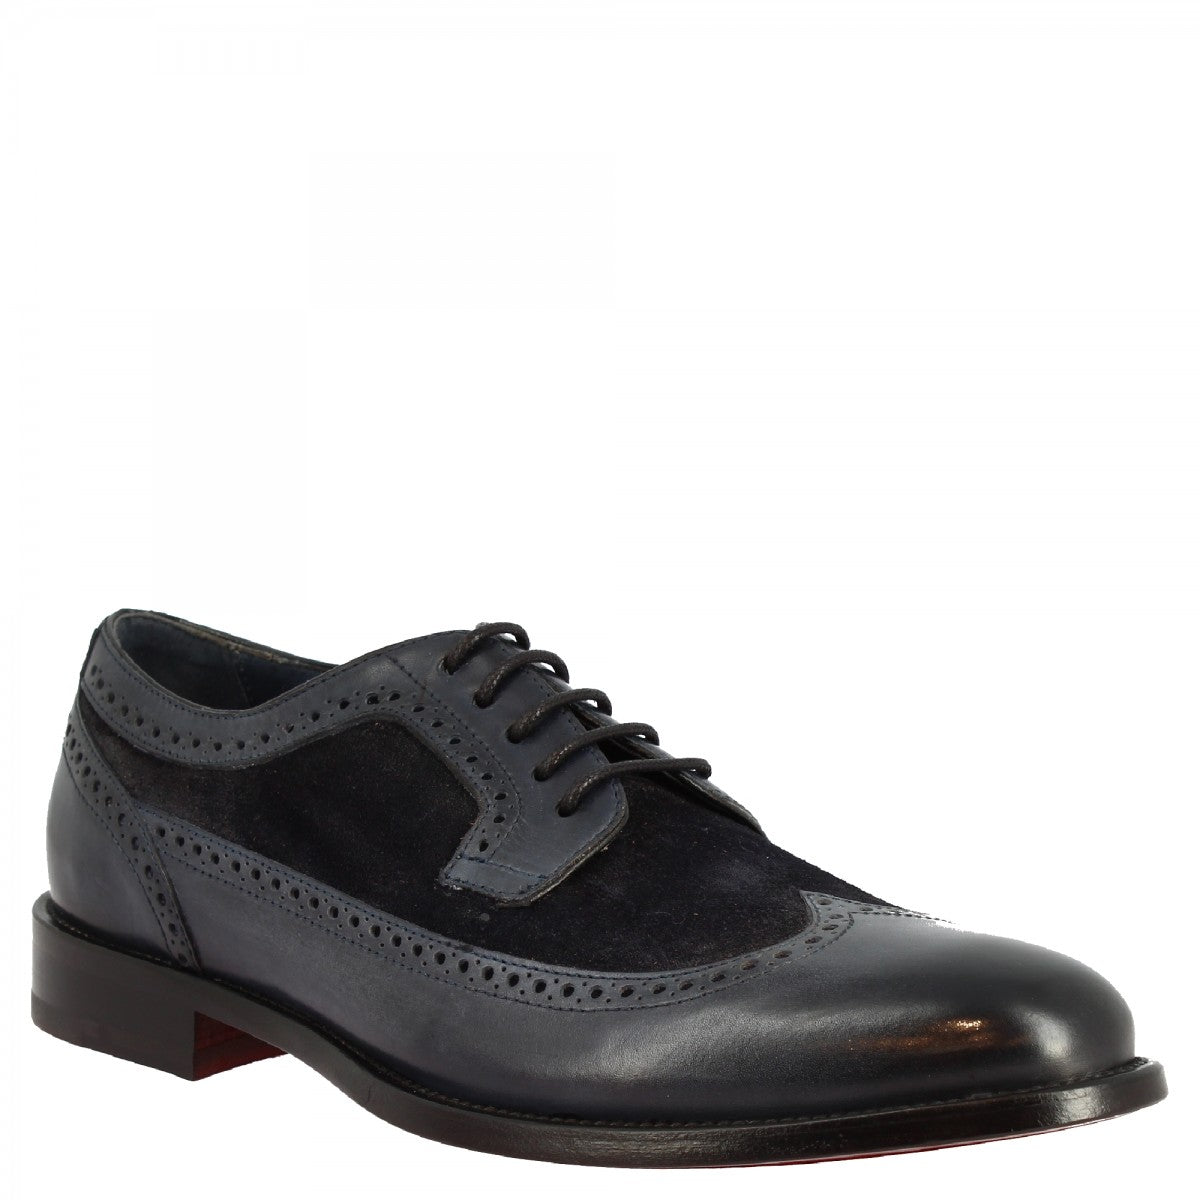 Men's handmade lace-up half brogues shoes in blue calfskin and suede